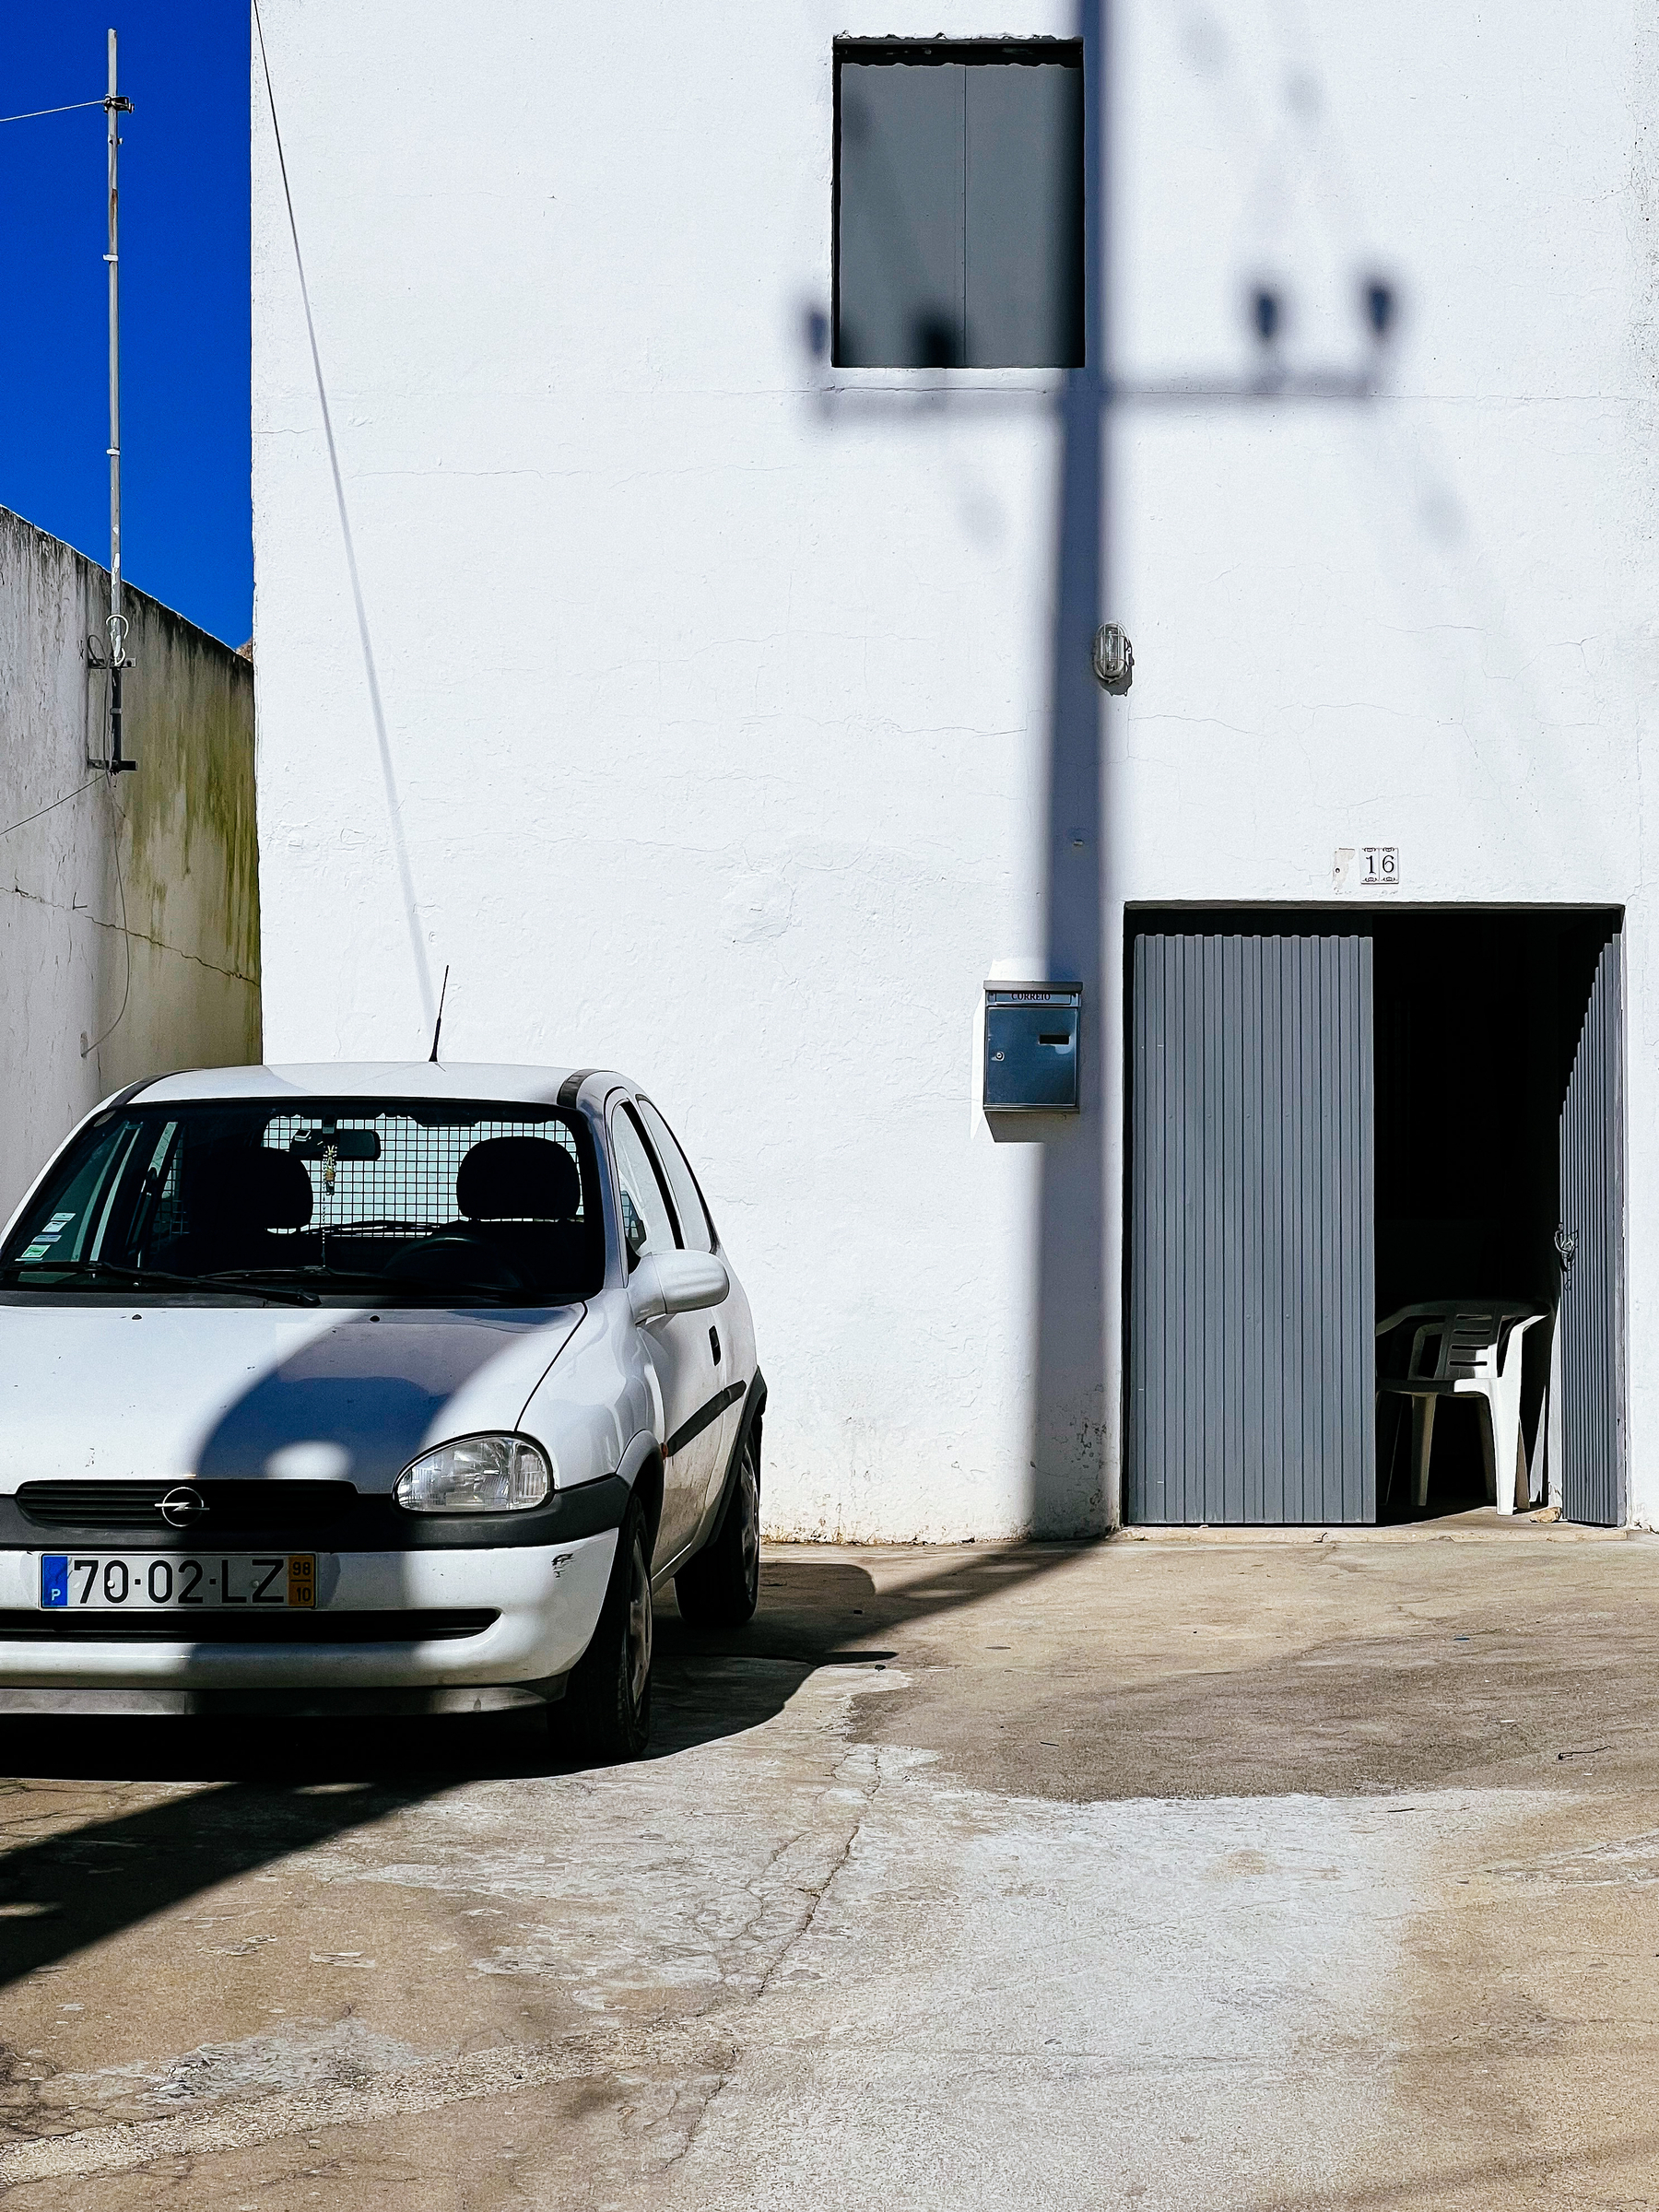 A white car parked in front of a white building, an ugly one. Shadows falling on both the car and the building. The whole scene is white.